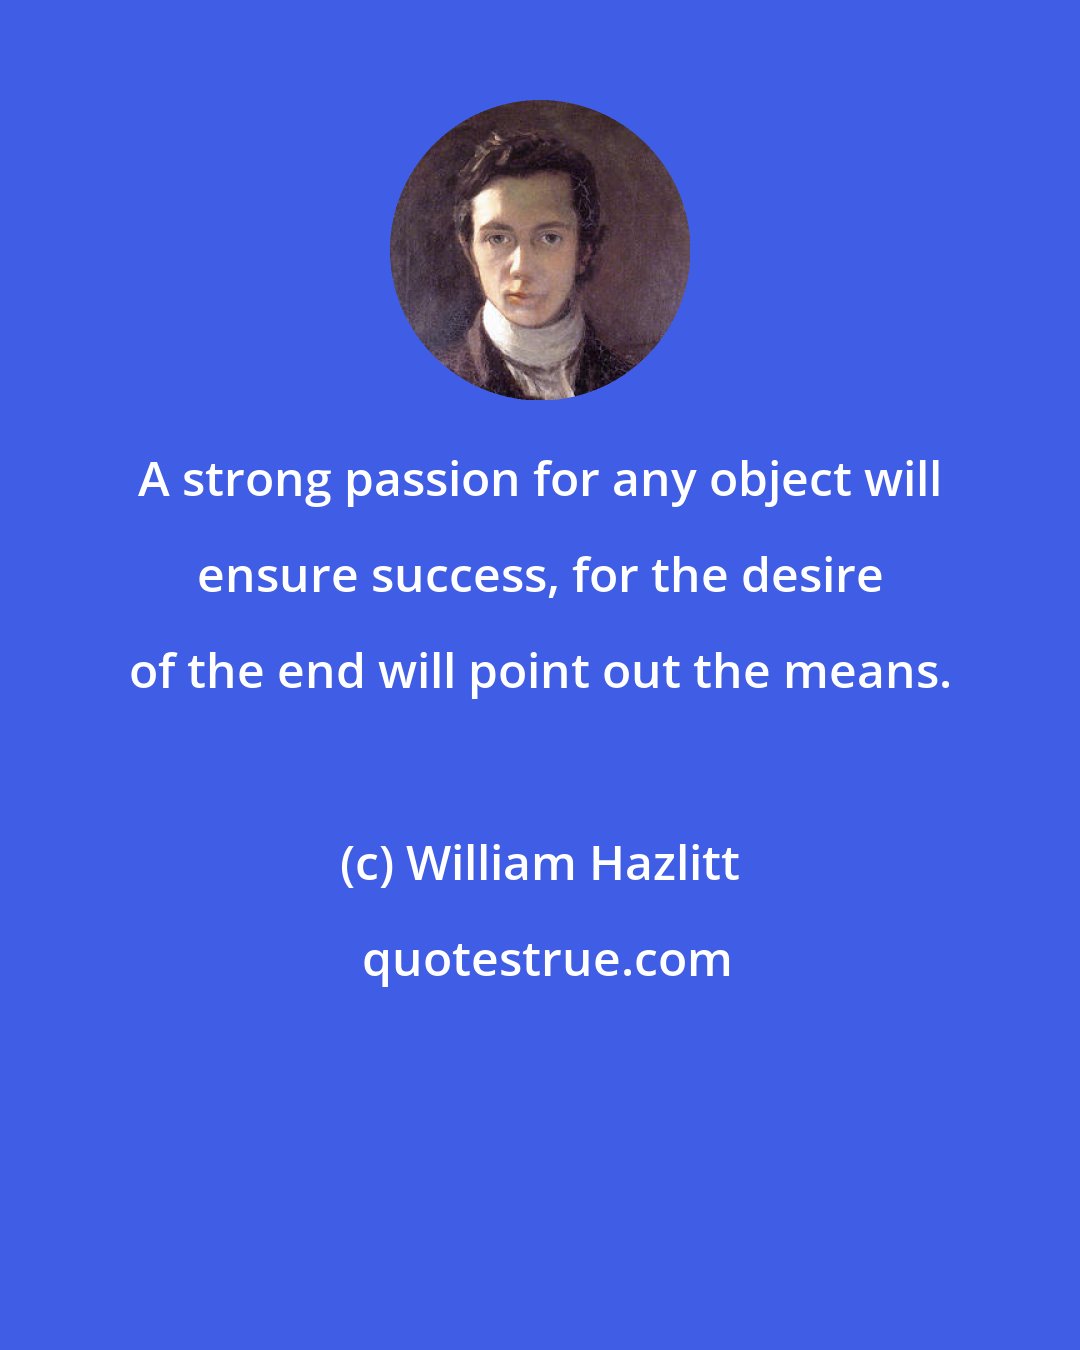 William Hazlitt: A strong passion for any object will ensure success, for the desire of the end will point out the means.